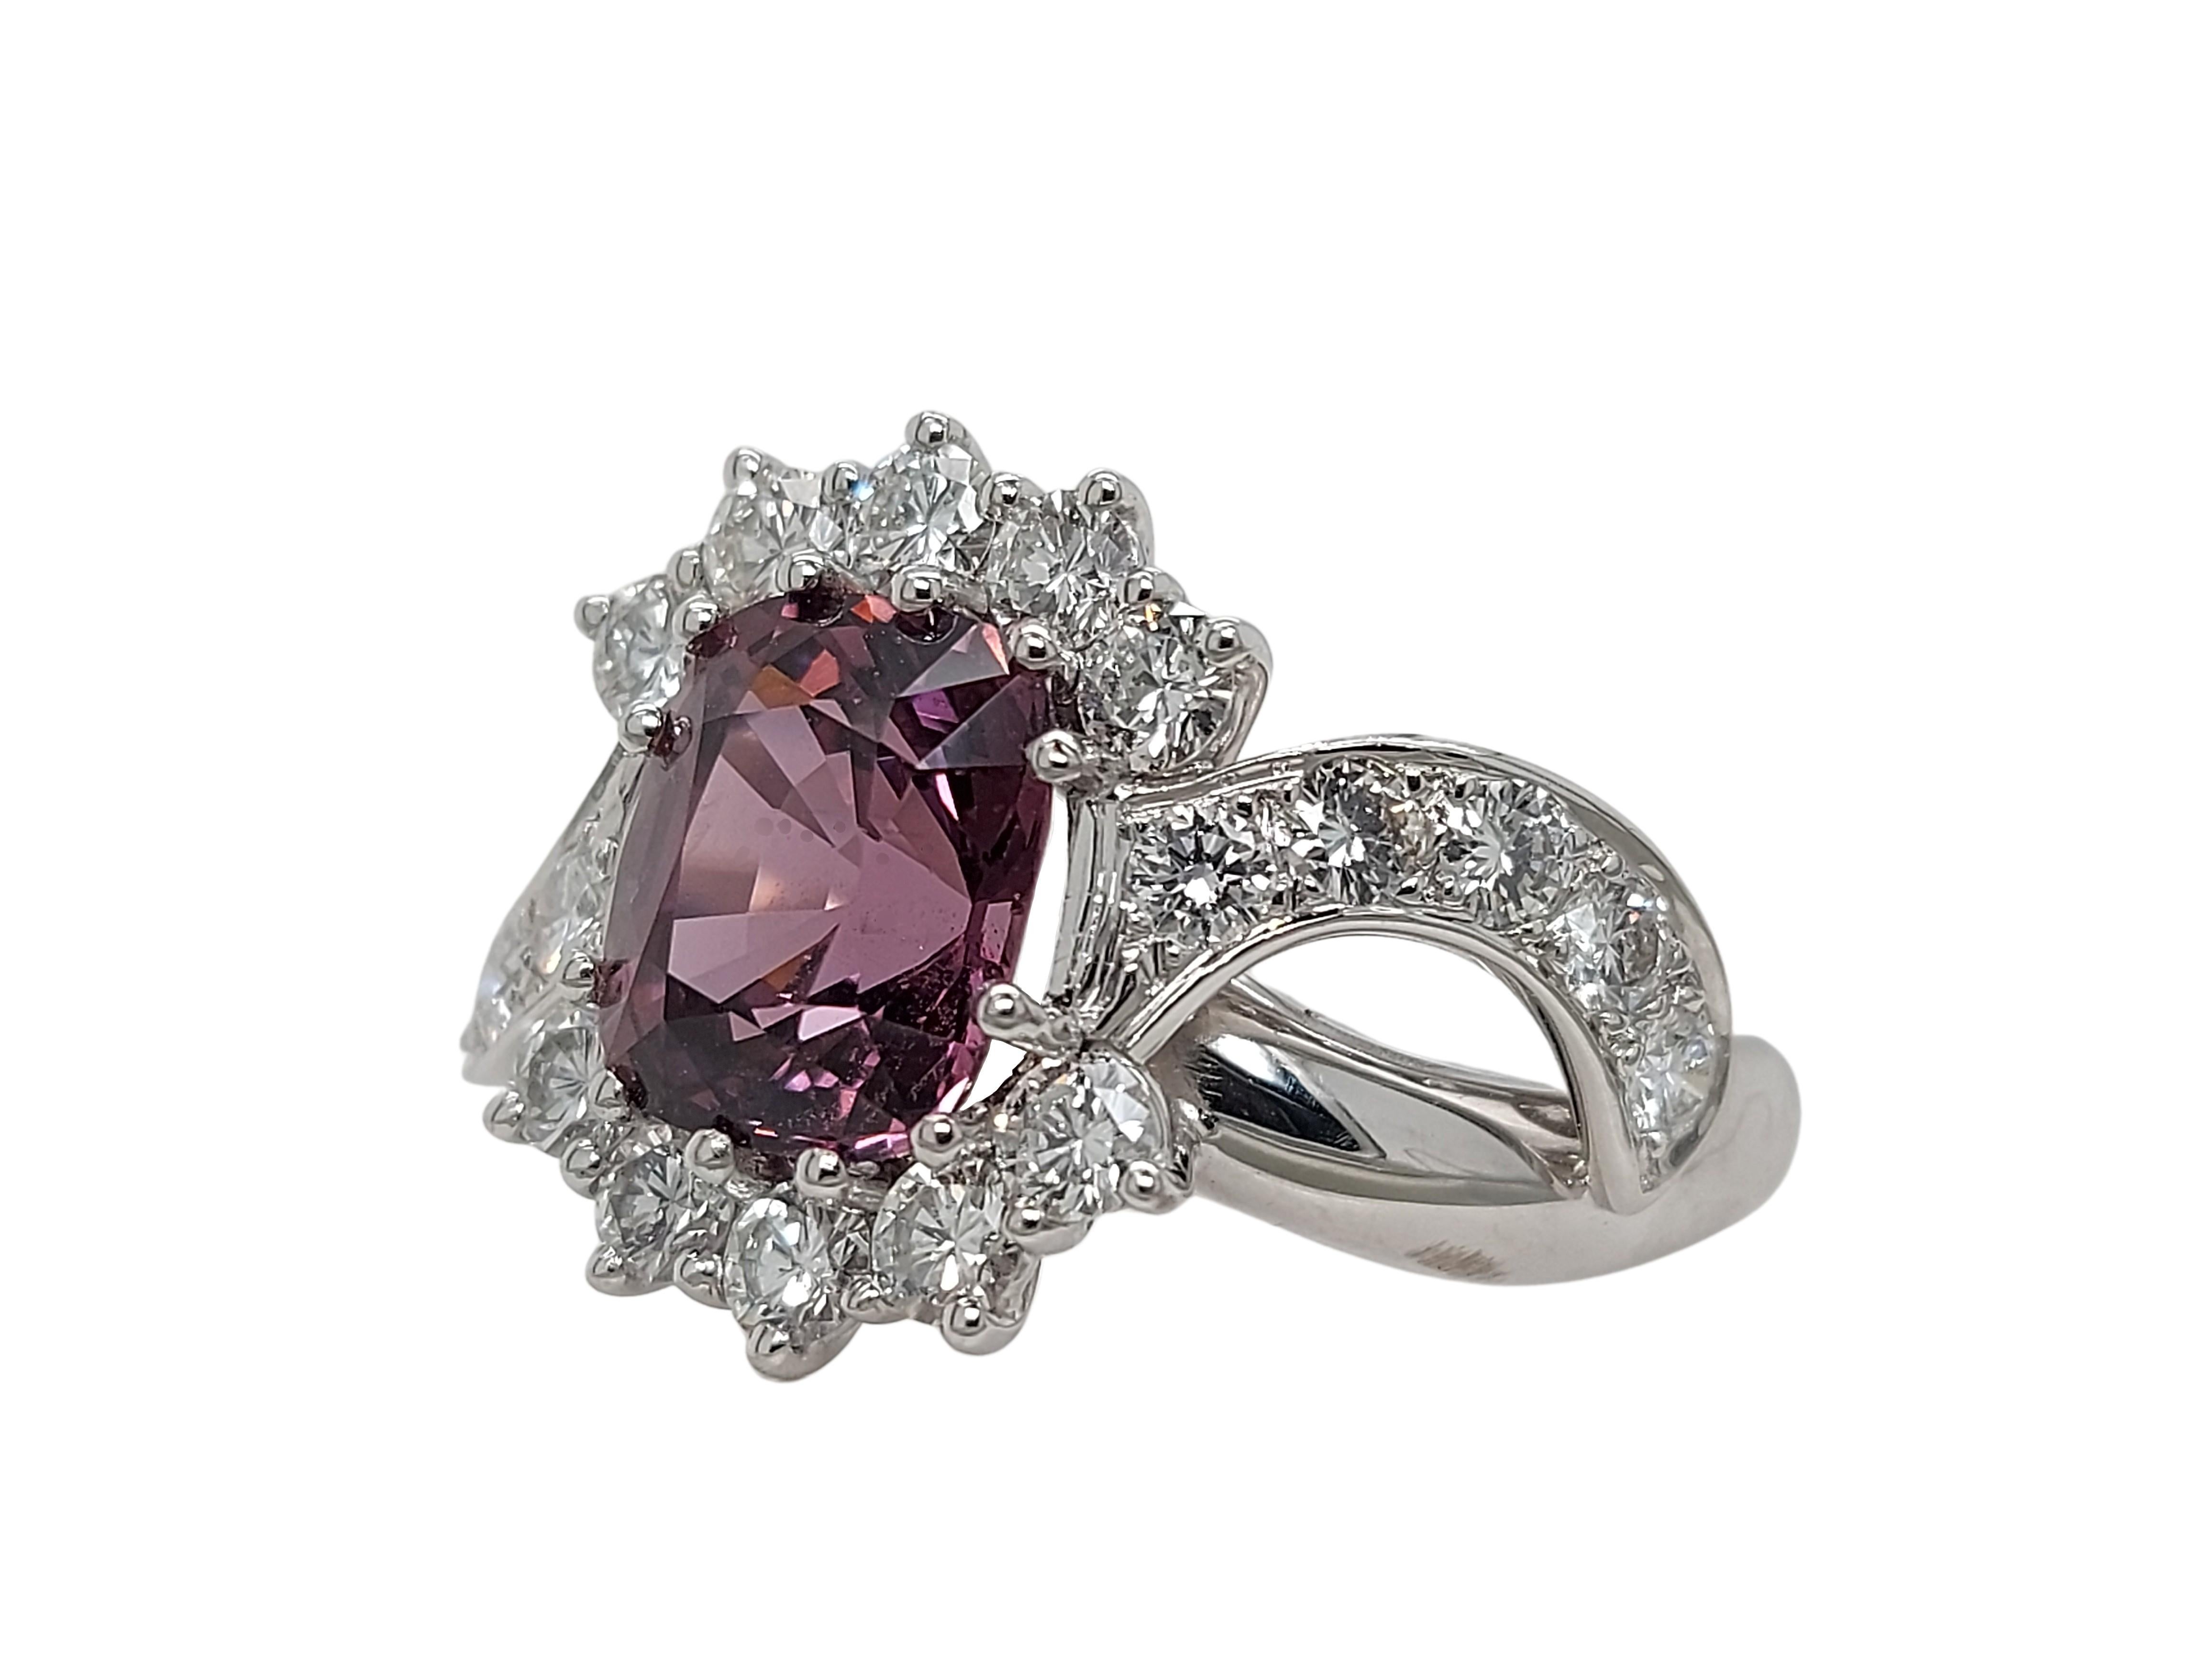 Women's or Men's 18kt White Gold Ring with a 3.25 Ct No Heat Spinel Stone and 1.2ct Diamonds For Sale